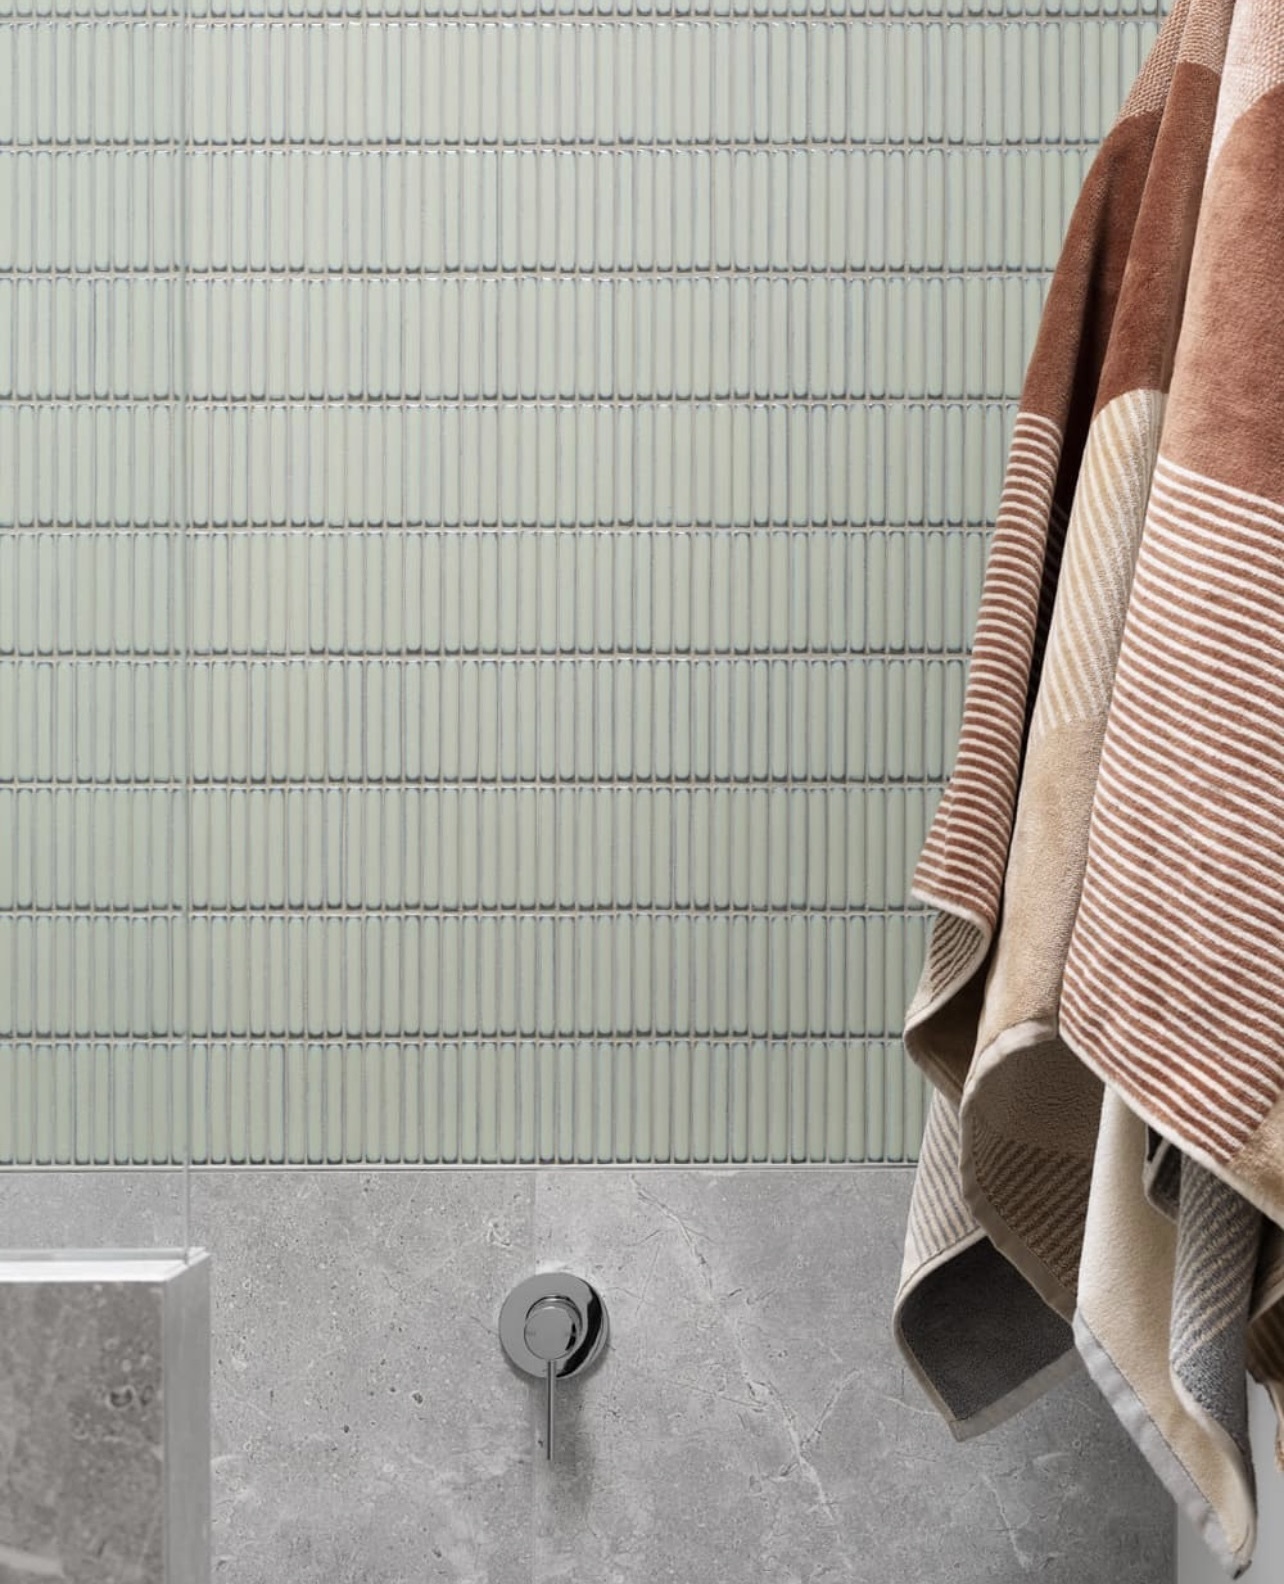 WALL TILES: Mini Light Green Kitkat with 311 Slate Grey Grout